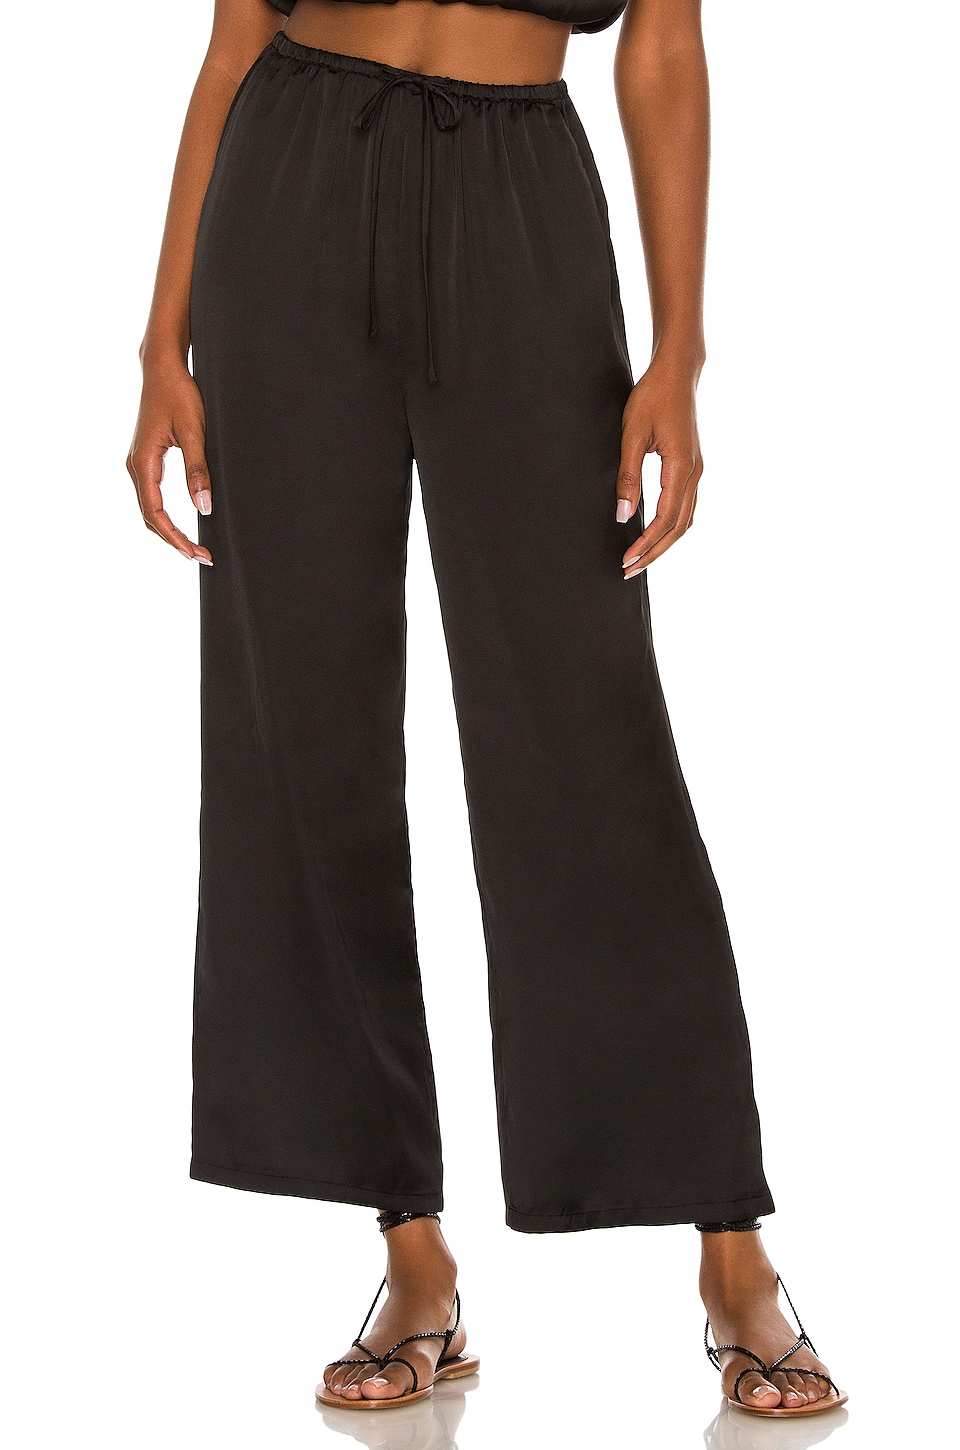 MAJORELLE Kassie Pant in Taupe Brown | REVOLVE